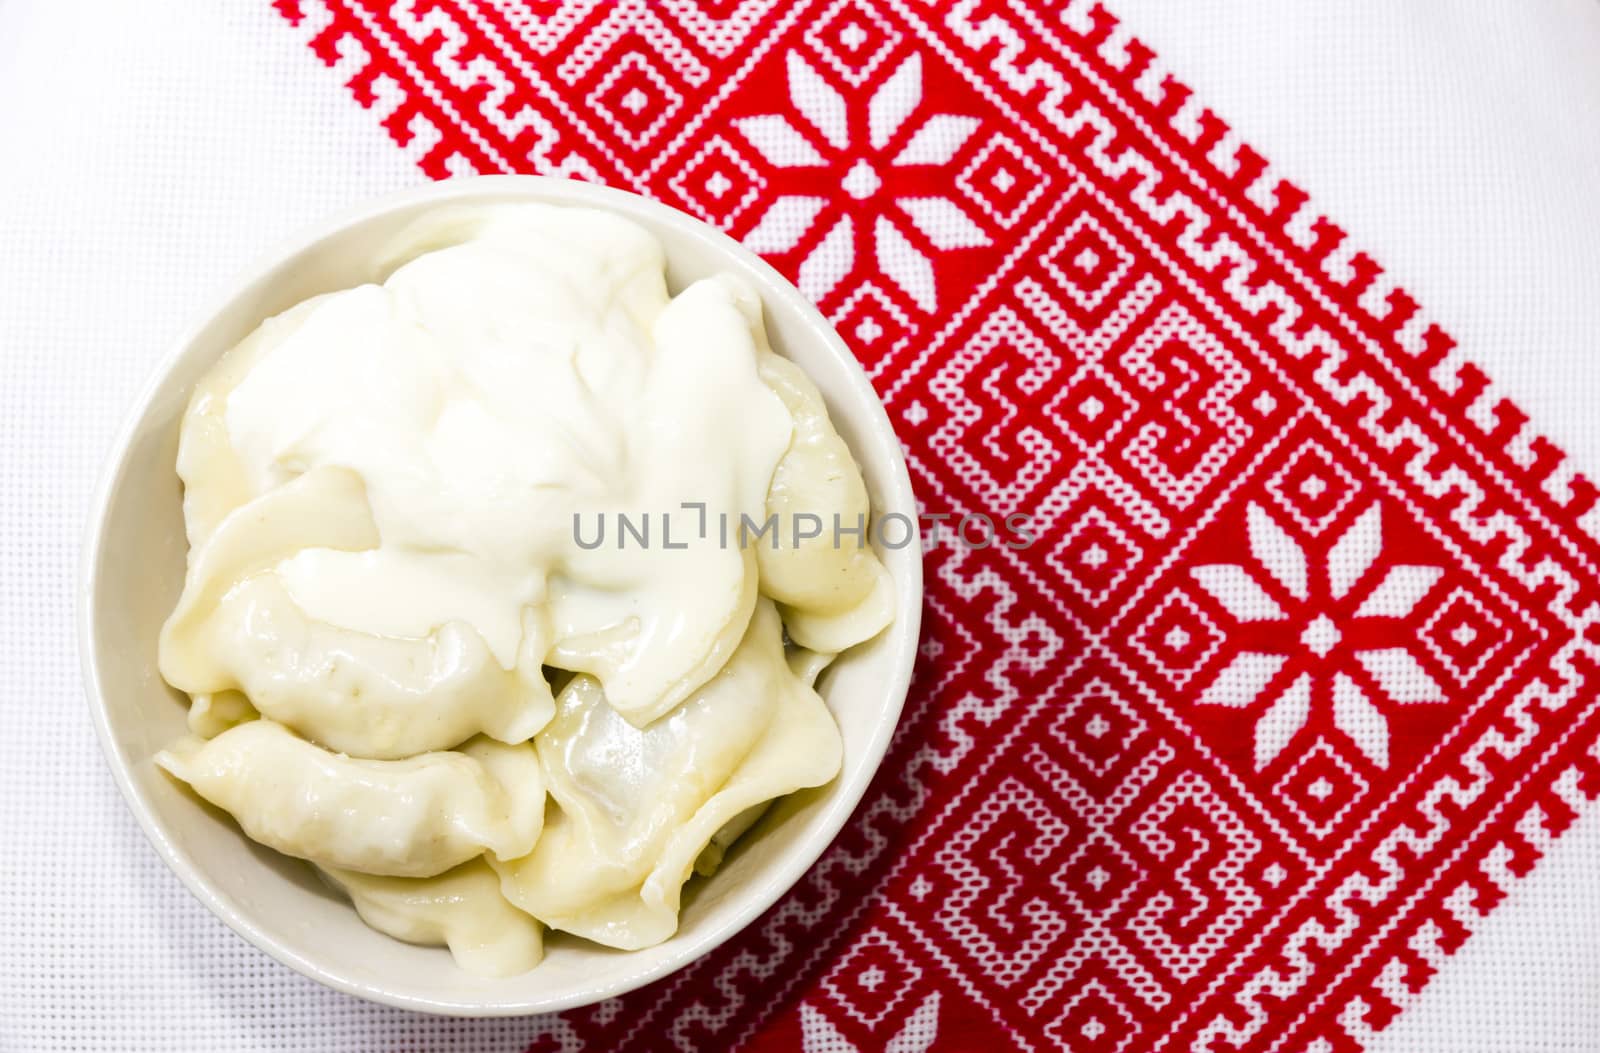 Dumplings with sour cream on the Ukrainian embroidered towel by Tetyana